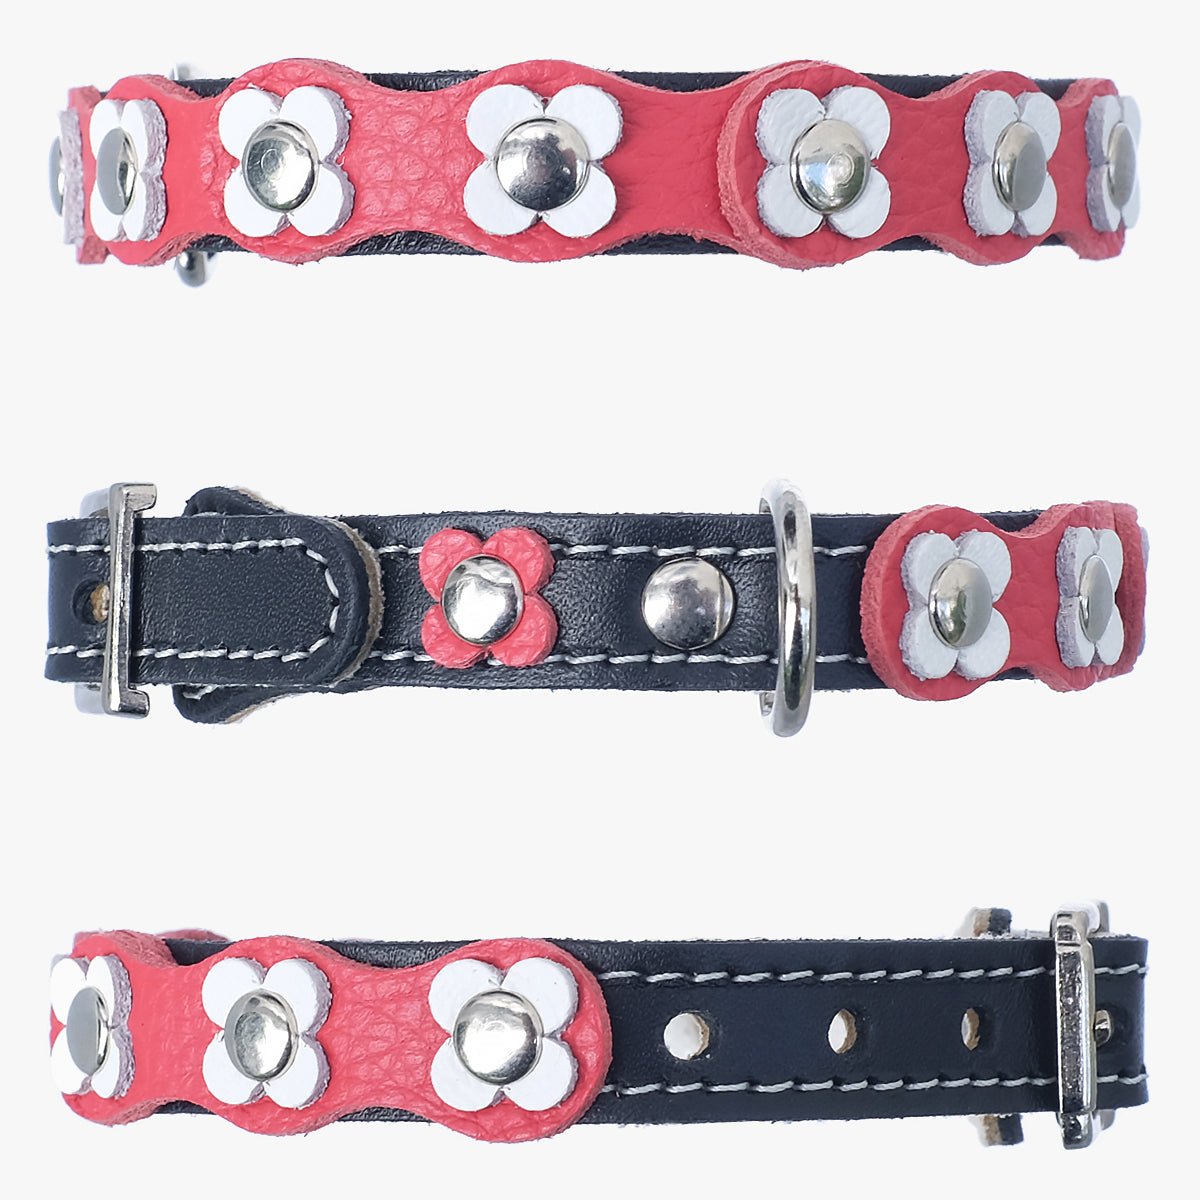 Superpipapo Luxury Leather Cat Collar, In Red & Black With Studs, & White Daisy Flower Patches | at Made Moggie